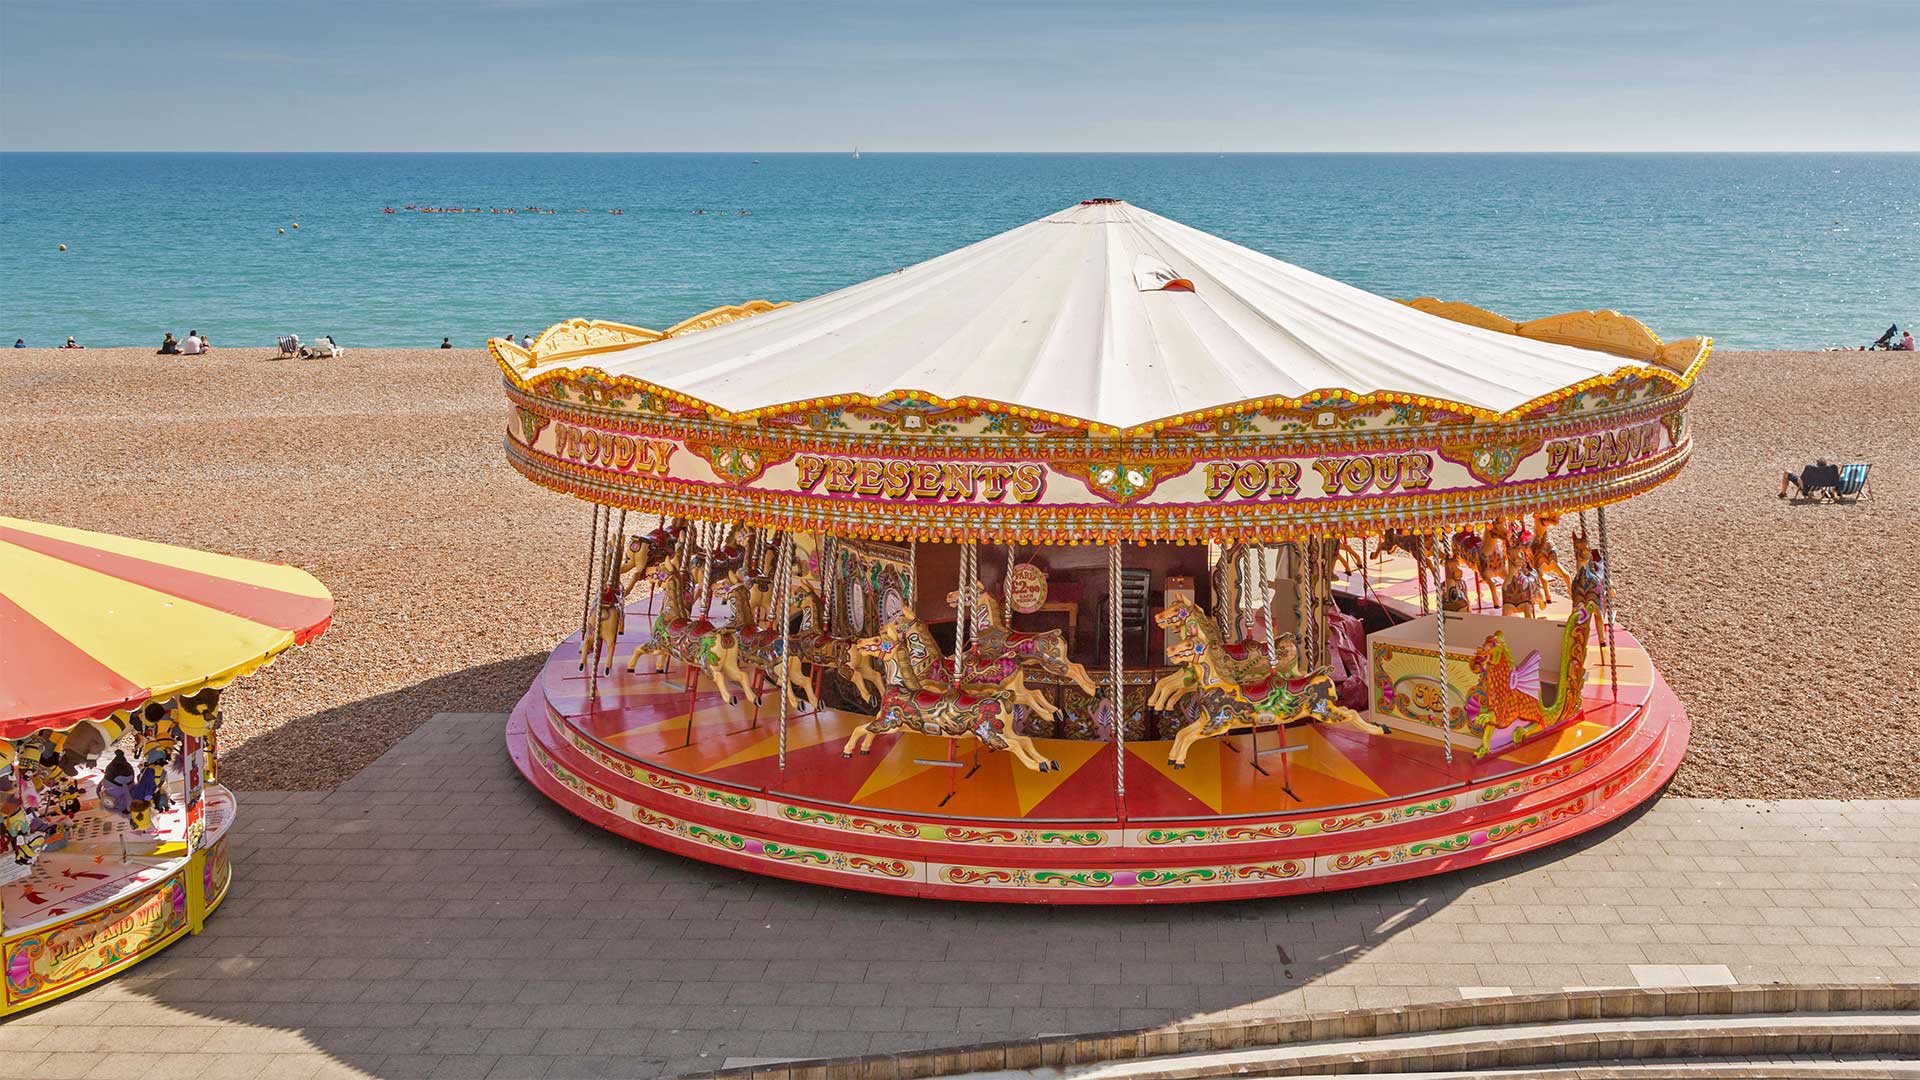 Golden Gallopers Carousel on the seafront in Brighton, East Sussex, England - Graham Prentice/Alamy)